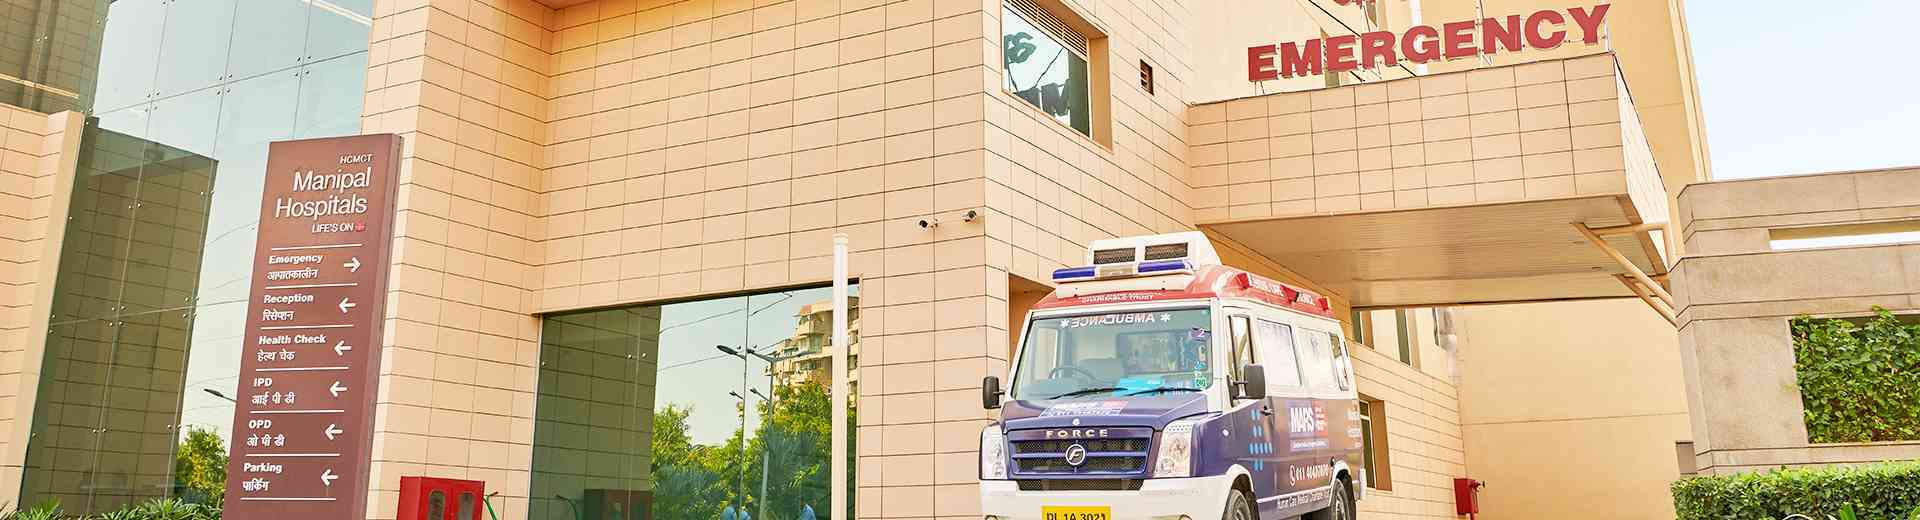 Accident and Emergency patient care services